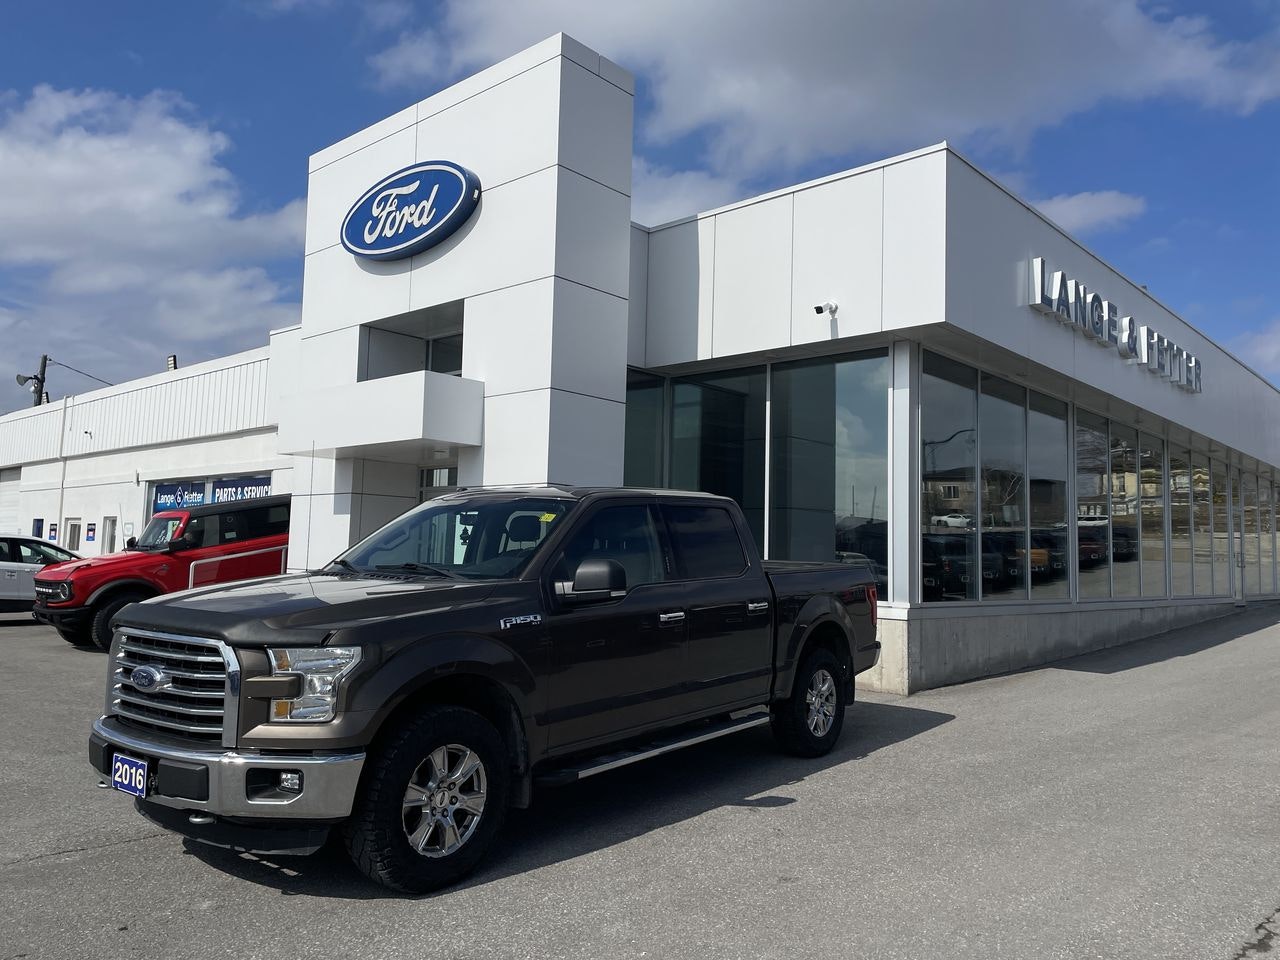 2016 Ford F-150 - 21783A Full Image 1